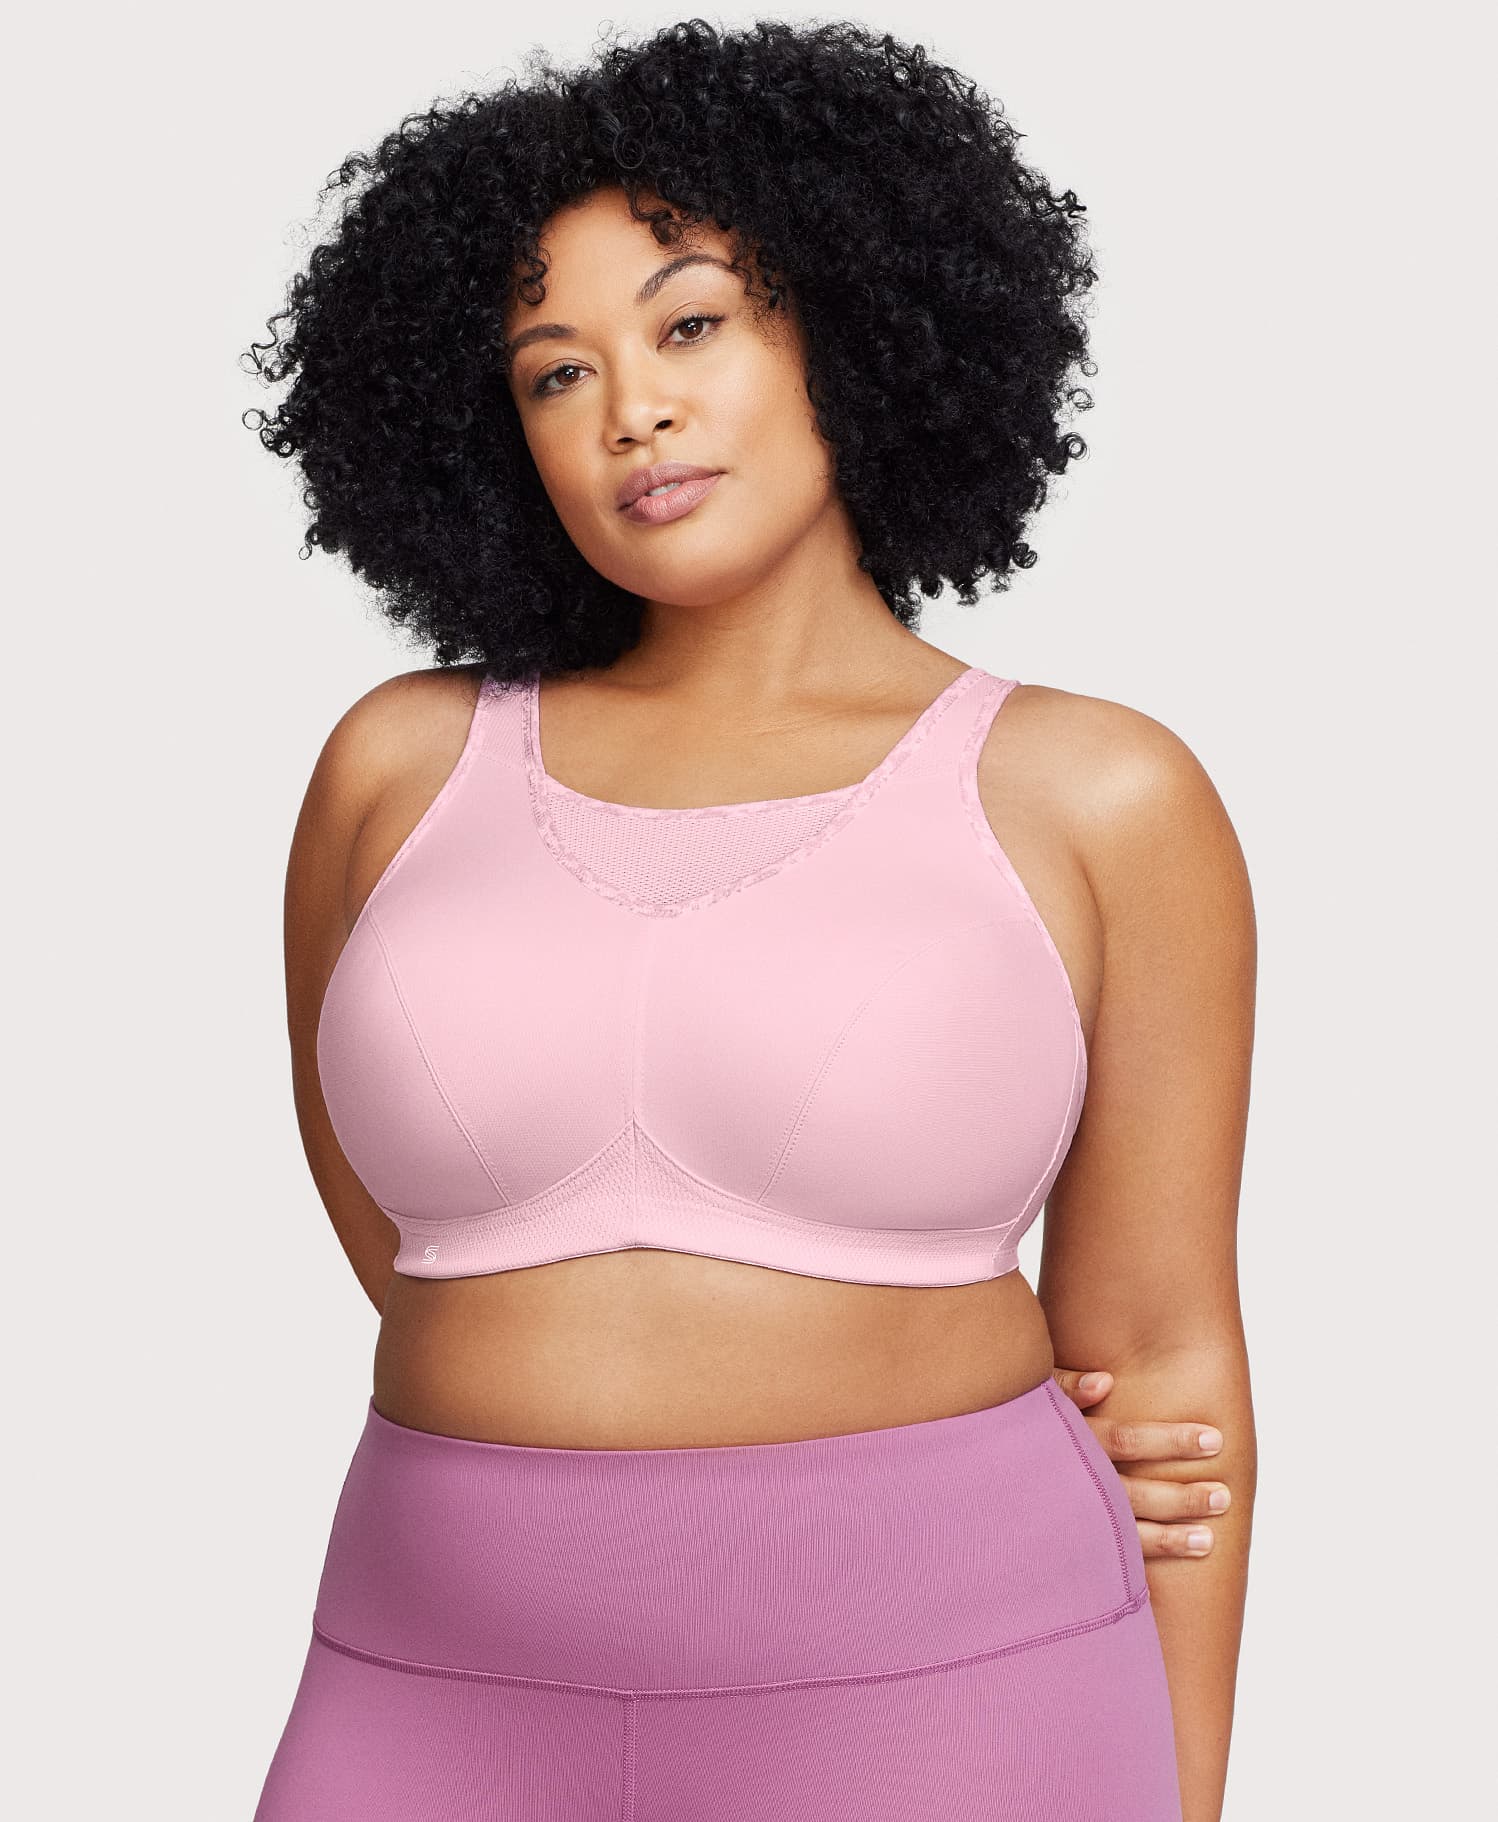 Plus Size Camisole Bras  Leisure or Everyday Bras for Plus Sizes